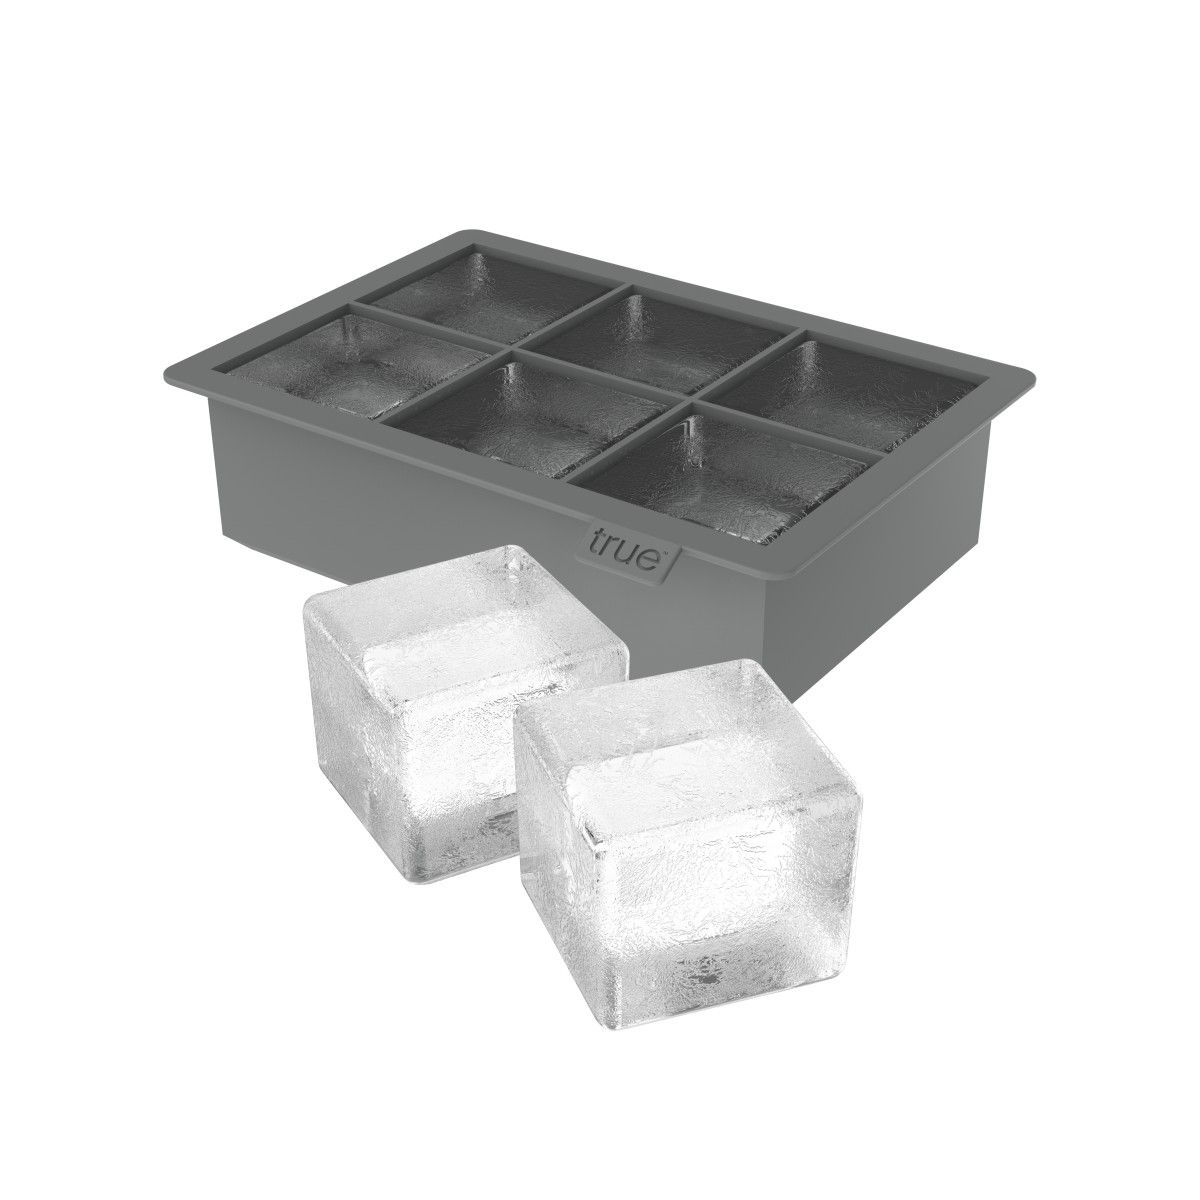 True Colossal Ice Cube Tray with ice cubes